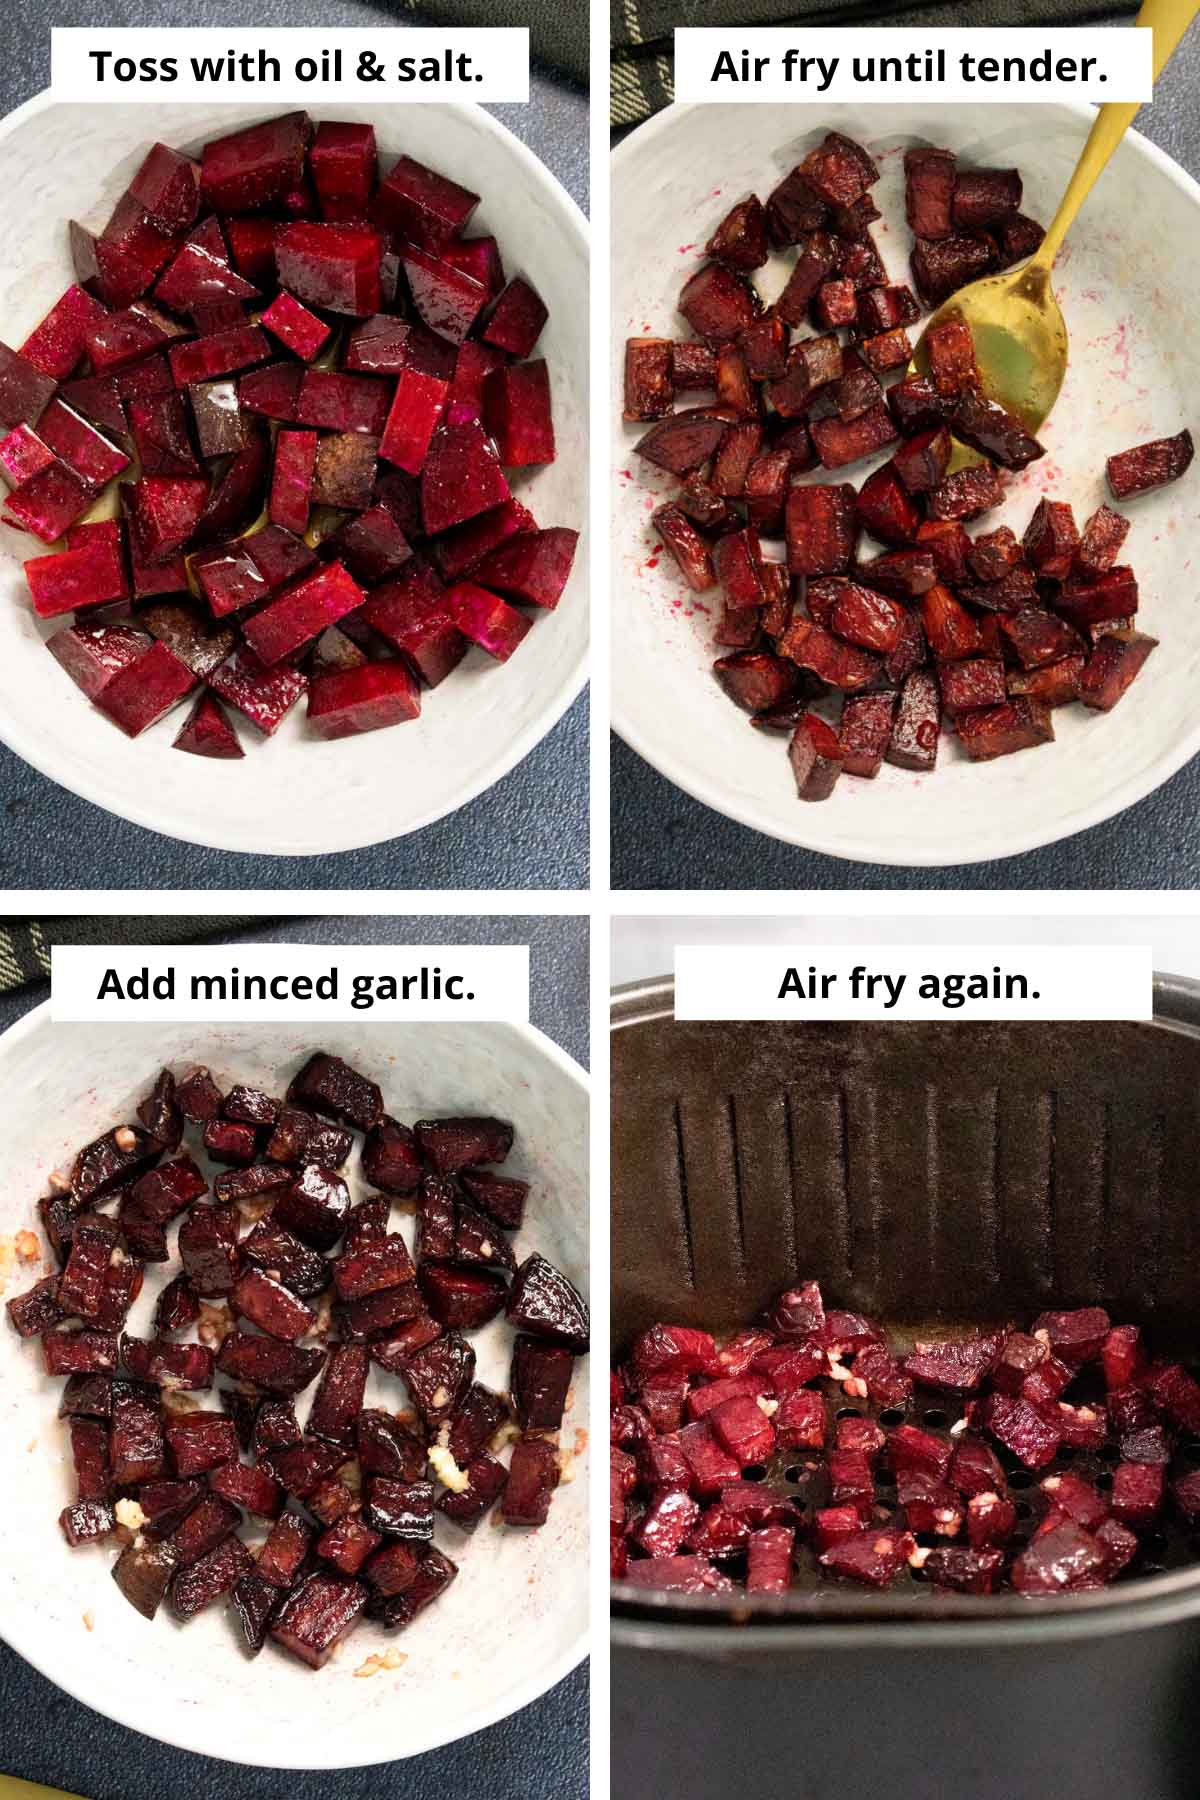 collage showing diced beets tossed with oil and salt, beets after air frying and then tossed with garlic, and the finished beets in the air fryer basket